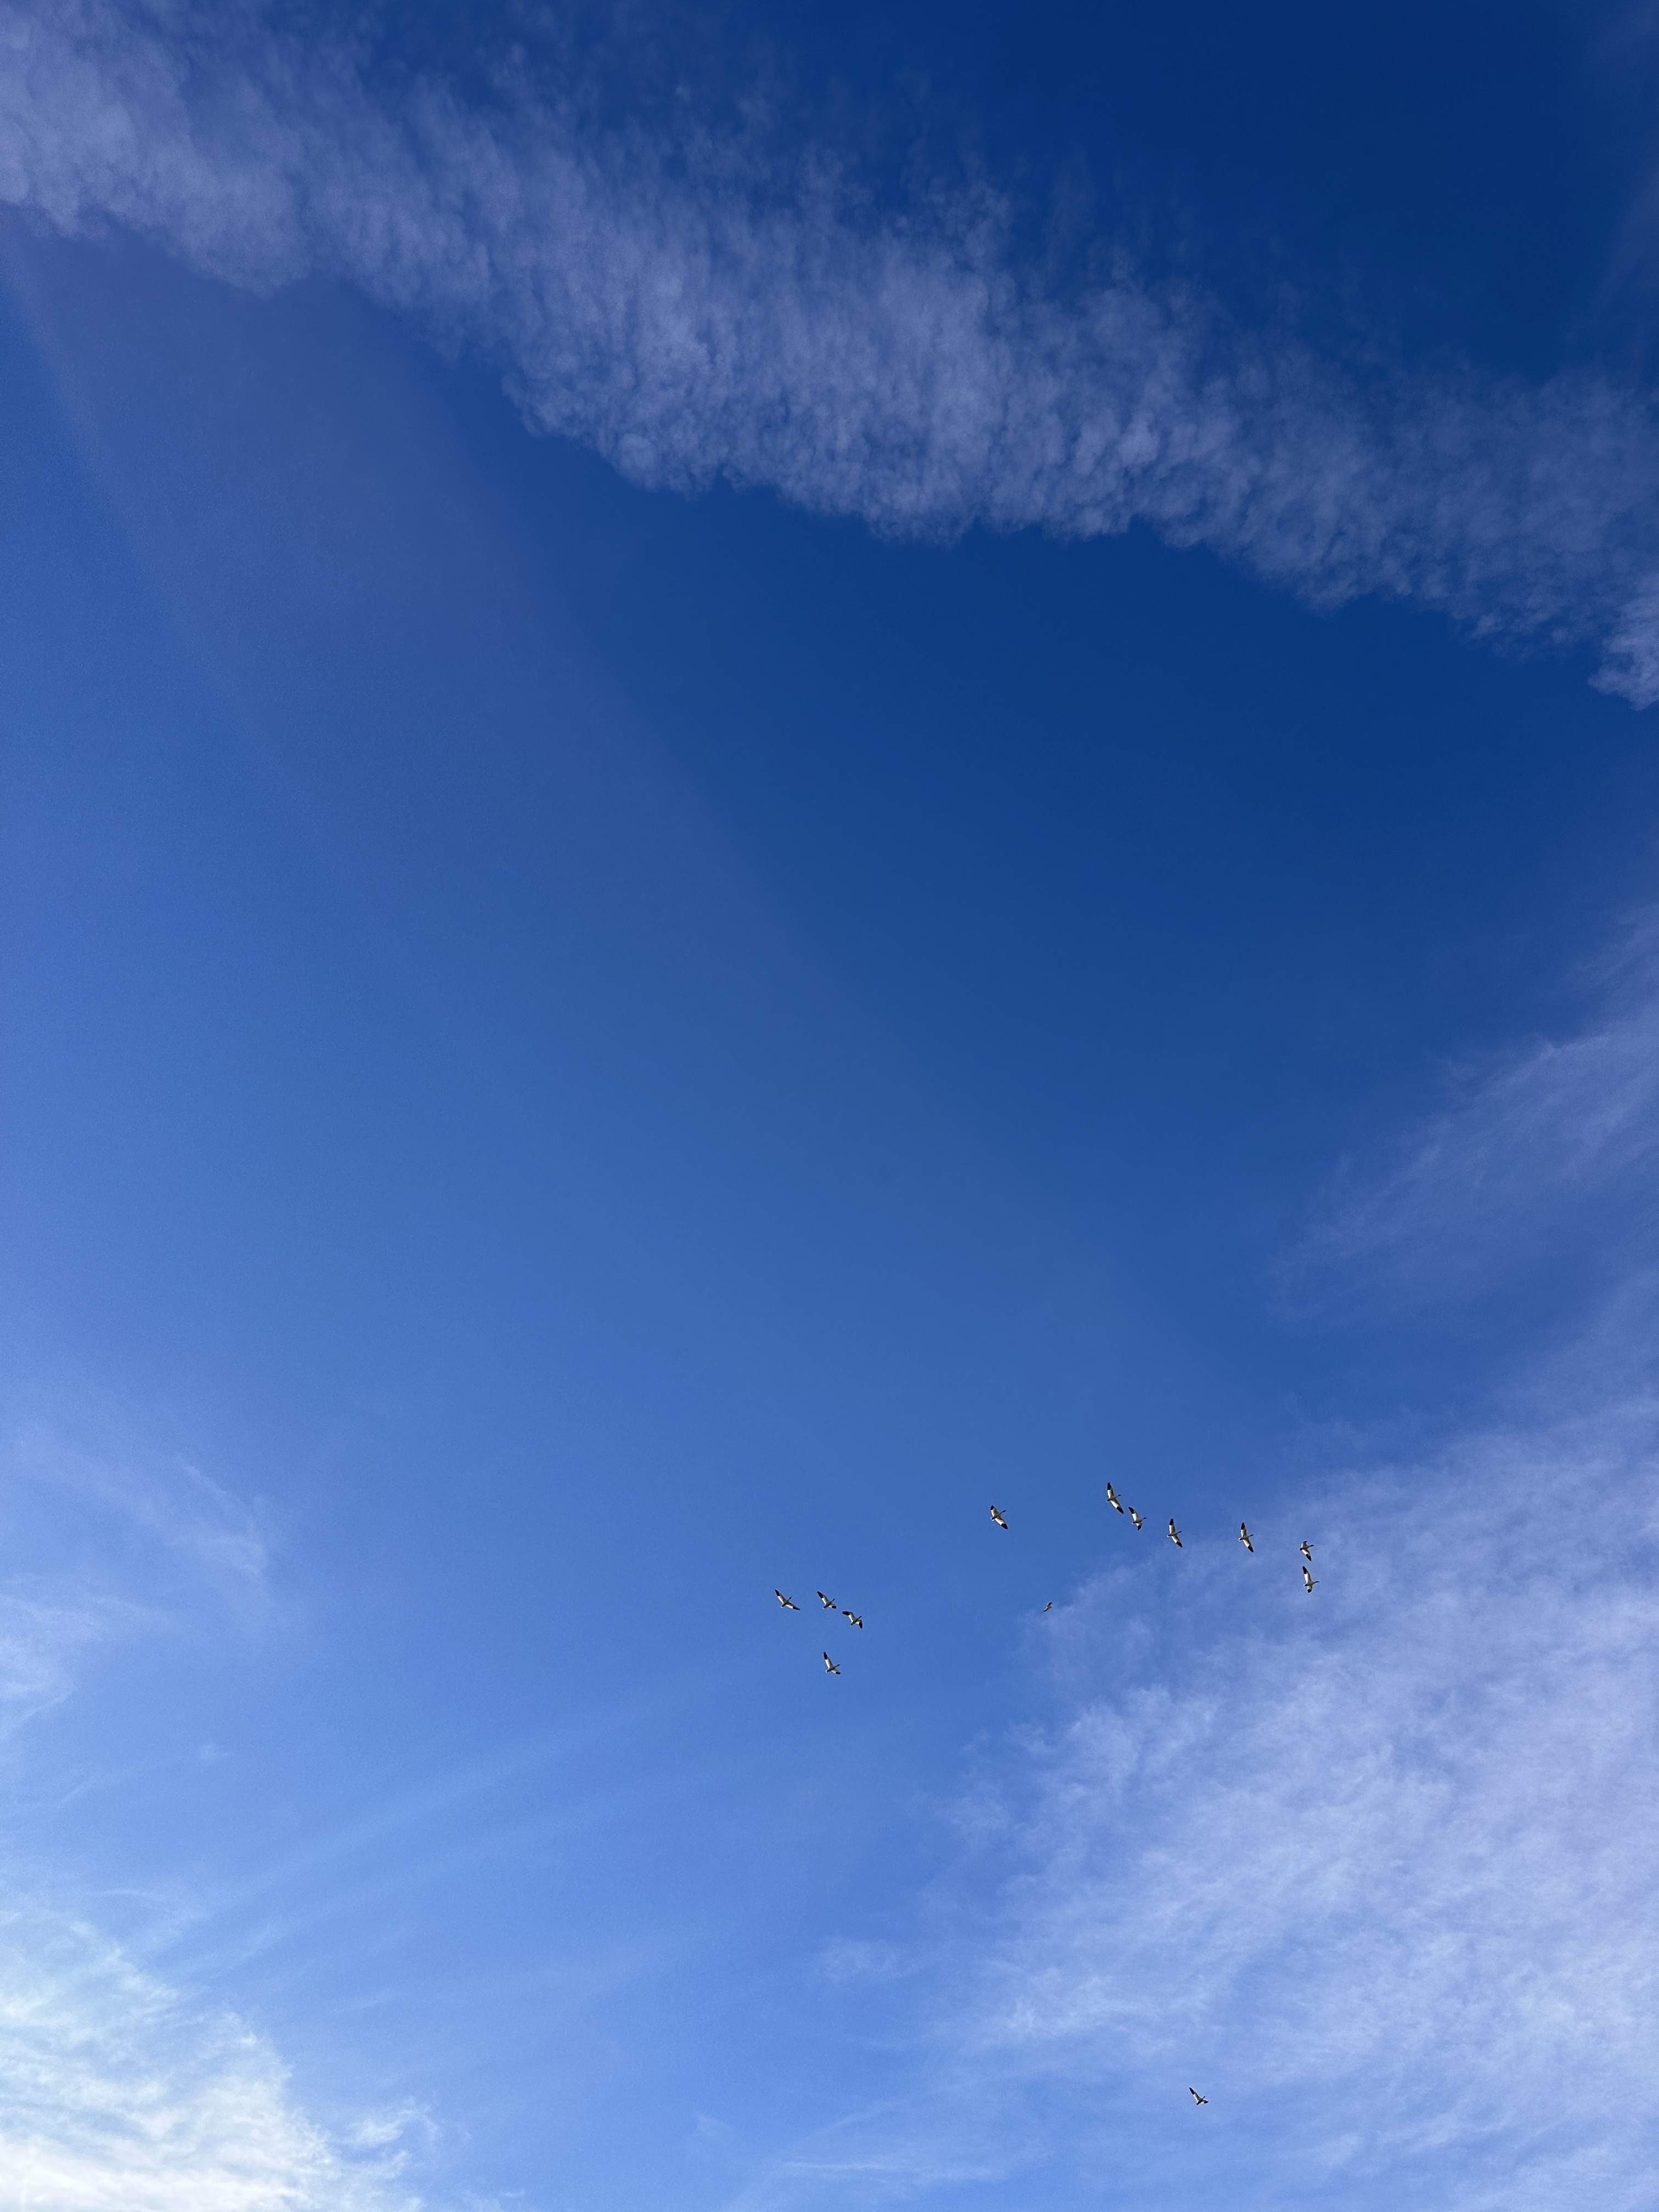 Snow geese fly over head in the Skagit Valley. (Credit: Lauren Gallup / NWPB)